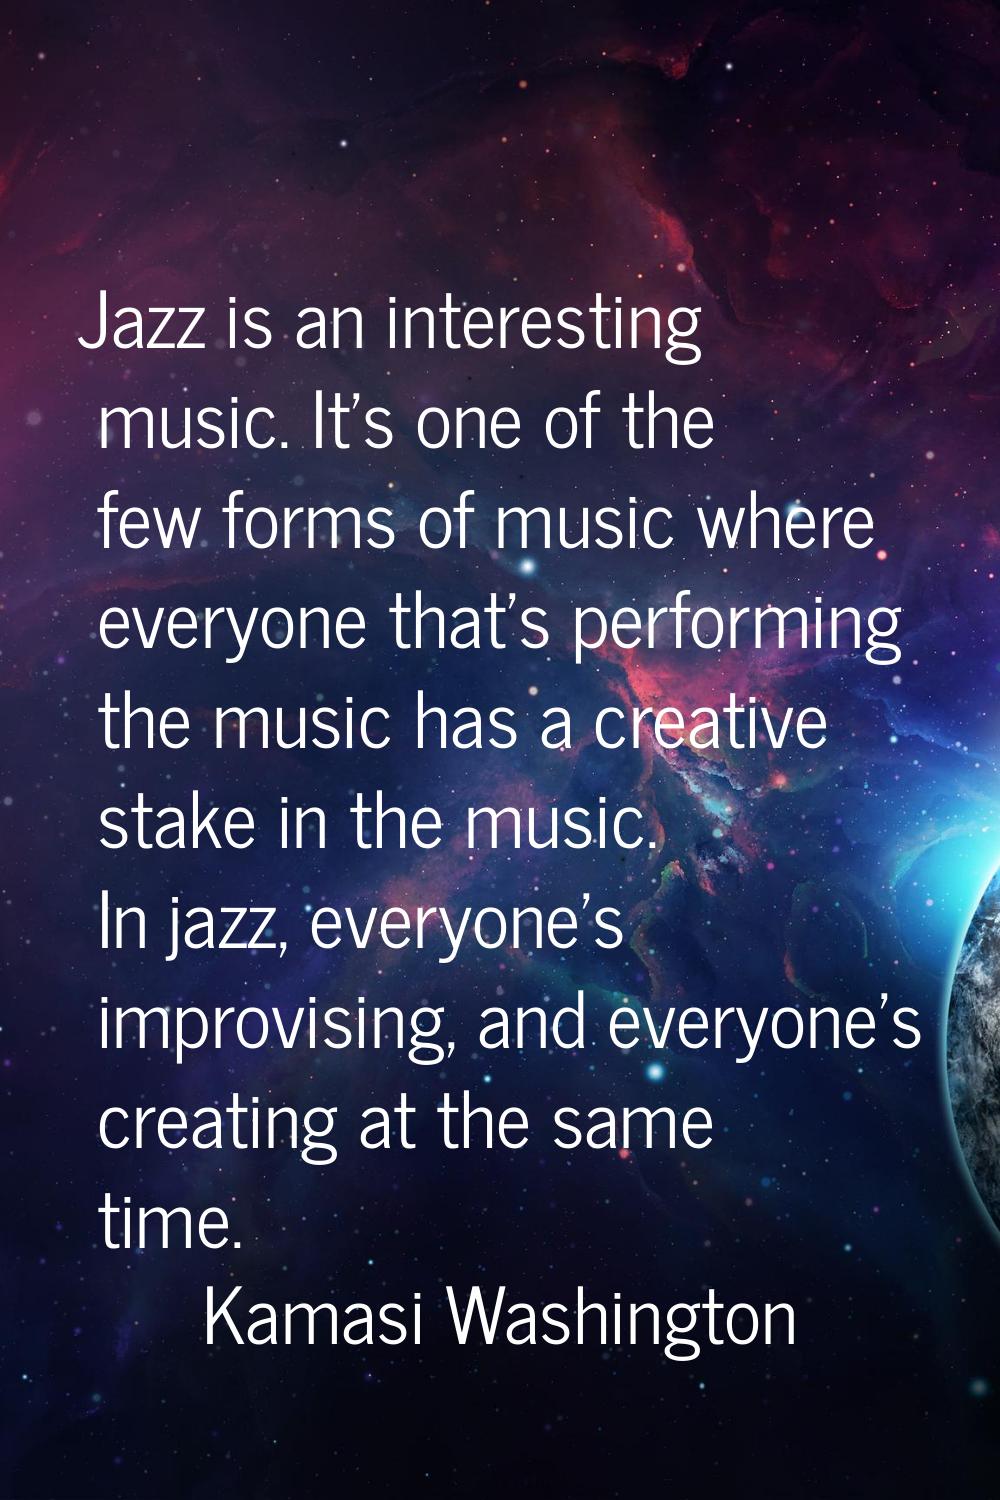 Jazz is an interesting music. It's one of the few forms of music where everyone that's performing t